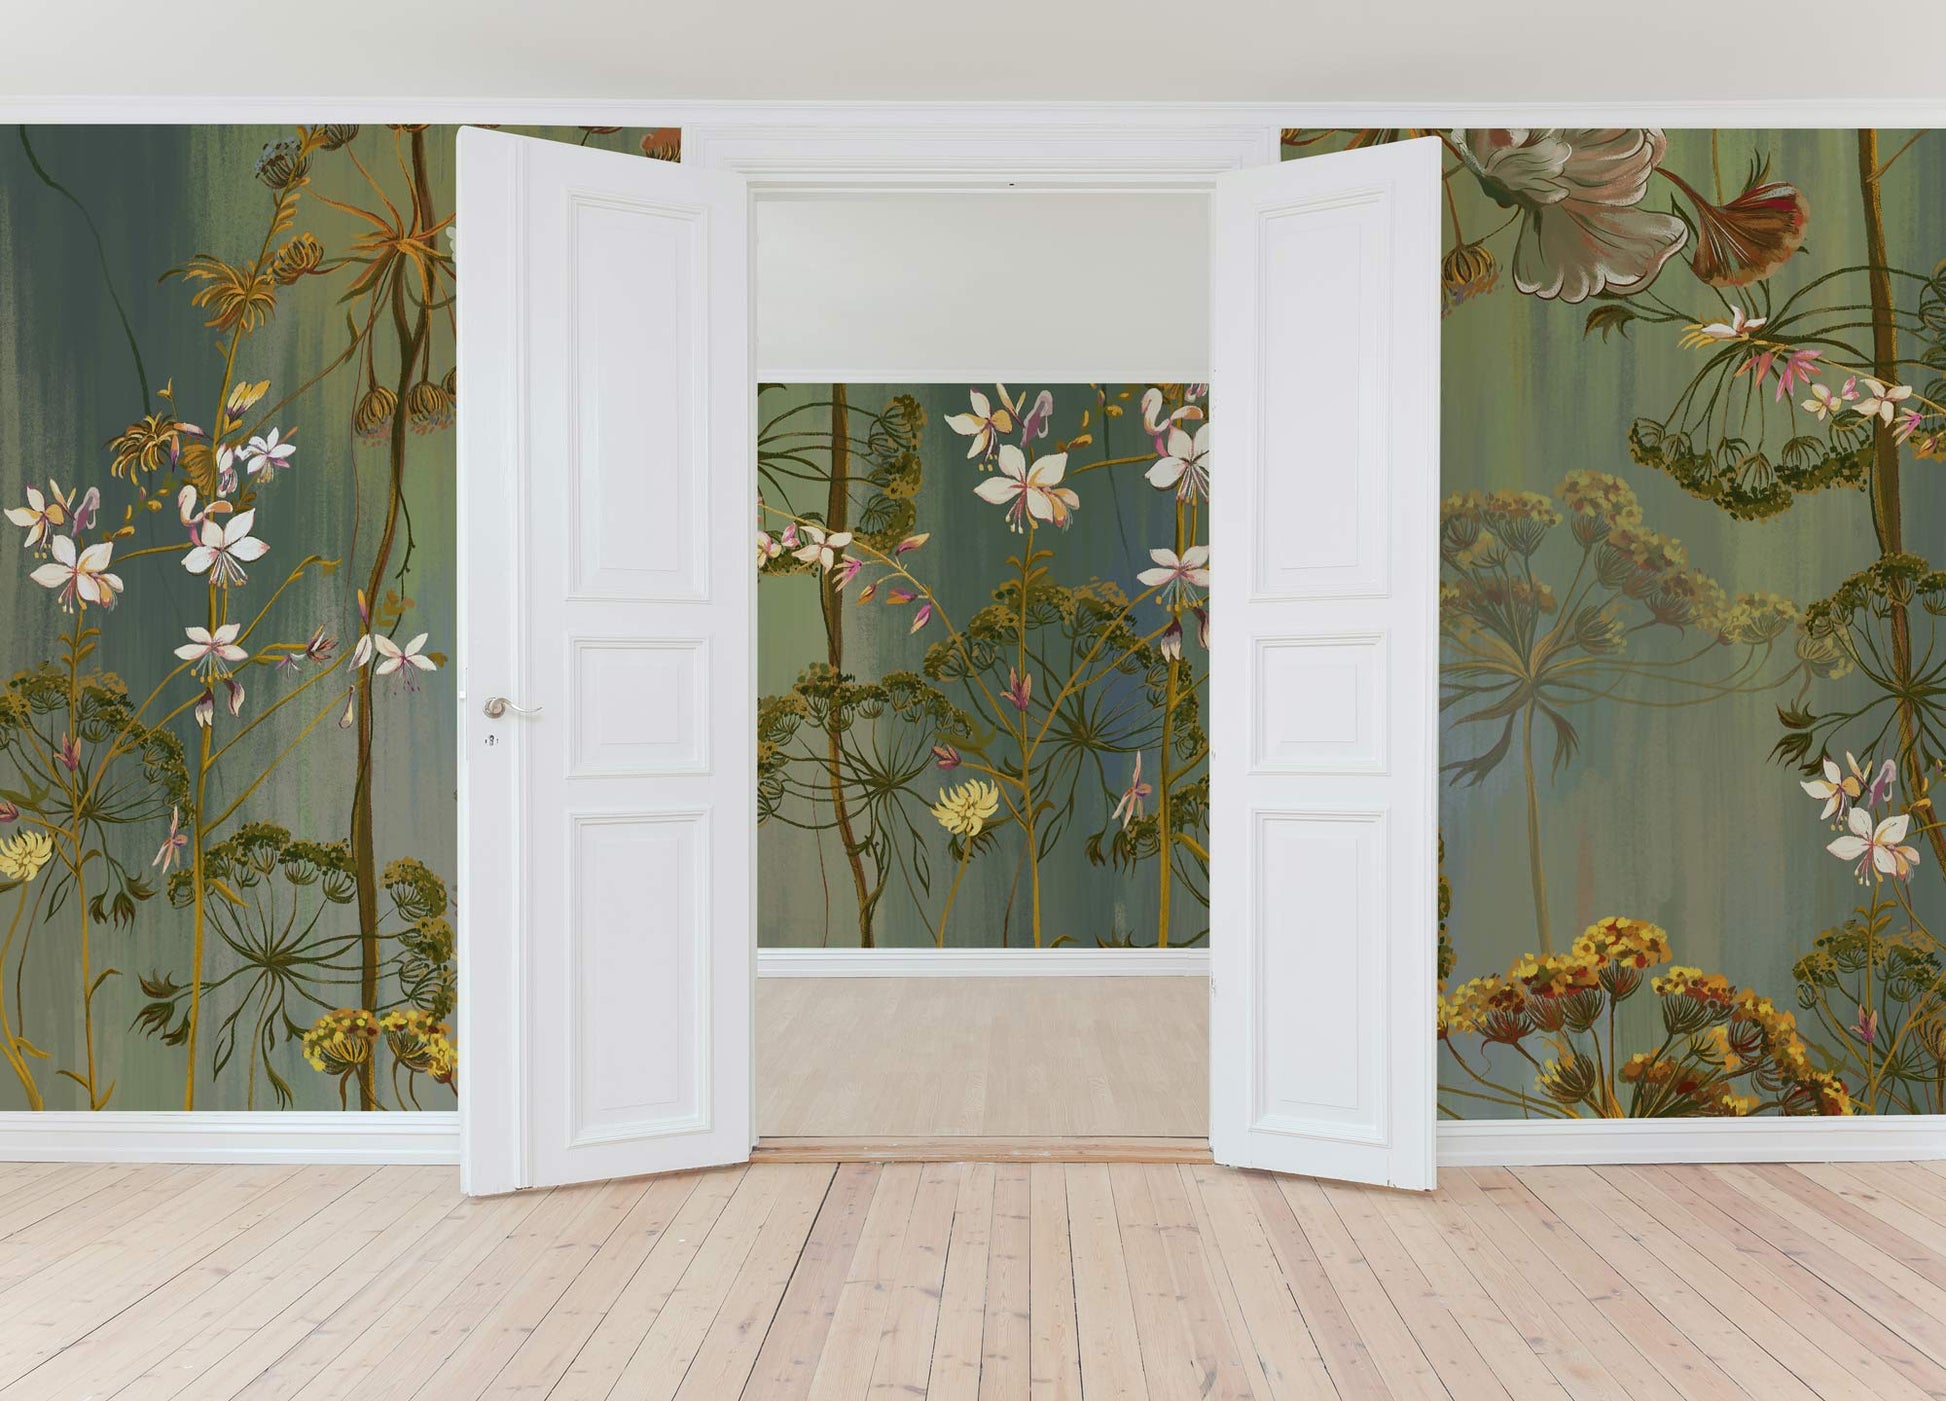 Hallway adorned with a Mural Wallpaper of Vintage Flowers and Vines